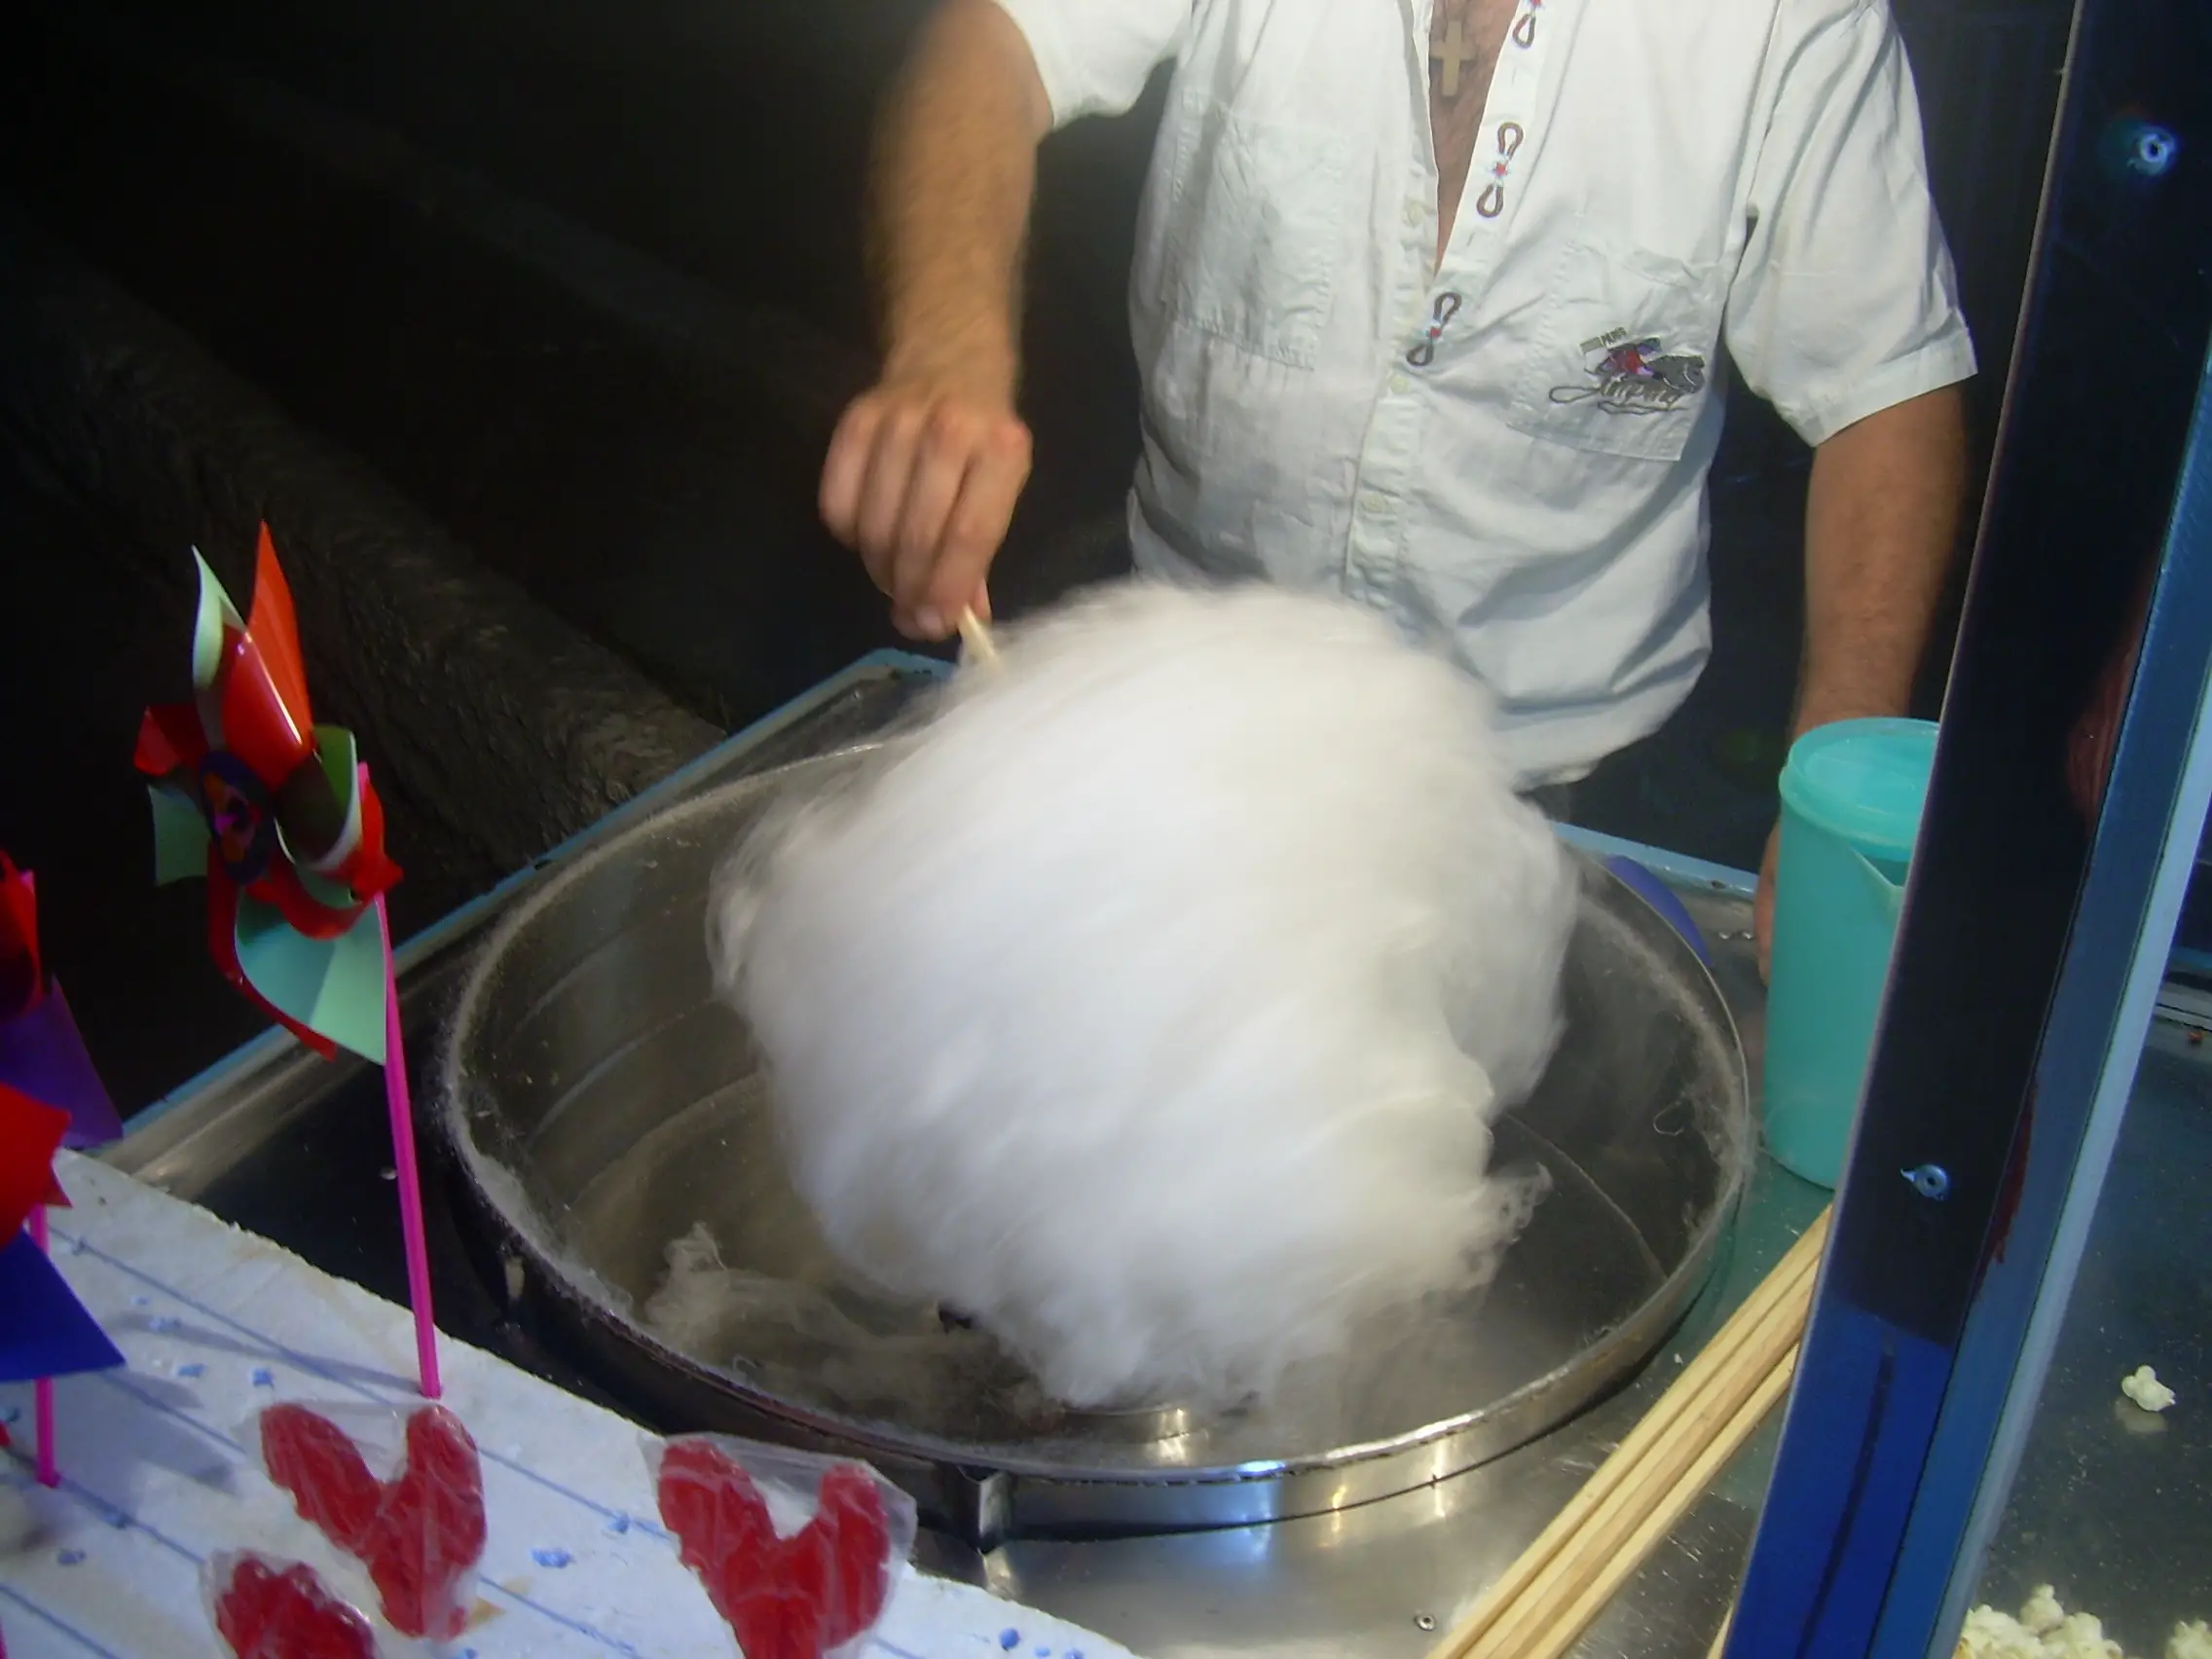 How To Clean a Cotton Candy Machine? Step-By-Step Process